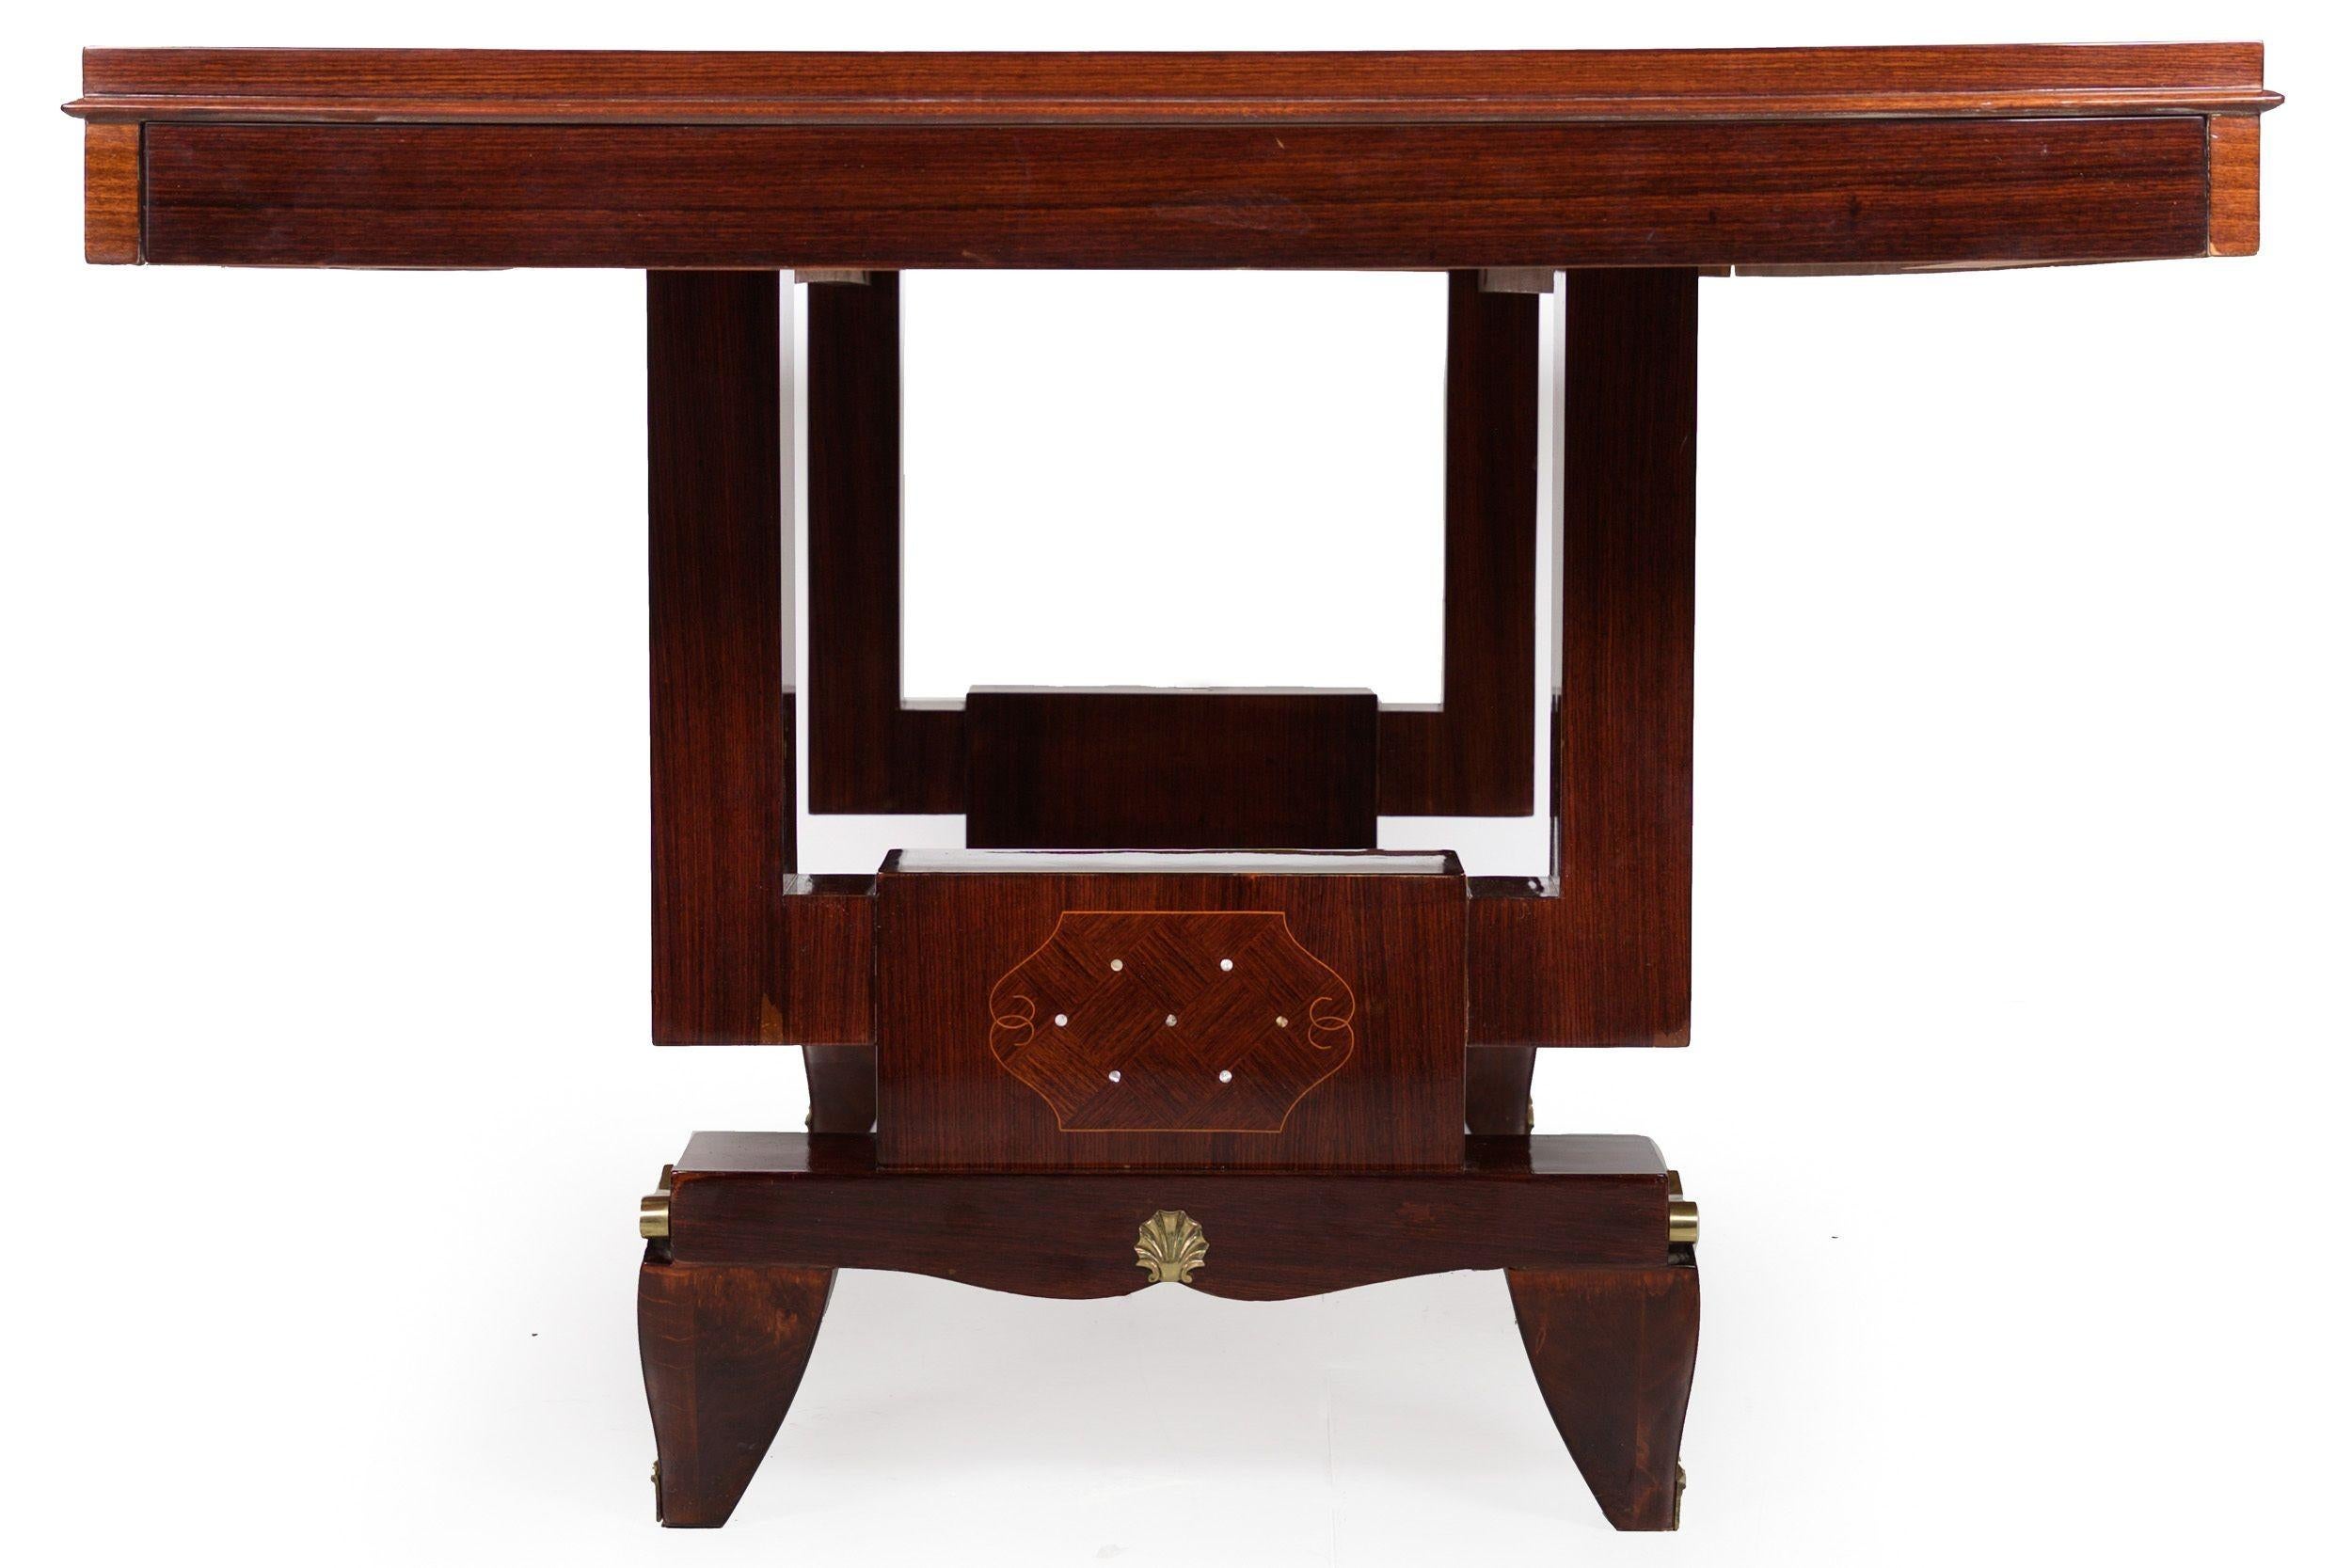 French Art Deco Inlaid Mother-of-Pearl Rosewood Dining Table, circa 1940s For Sale 11